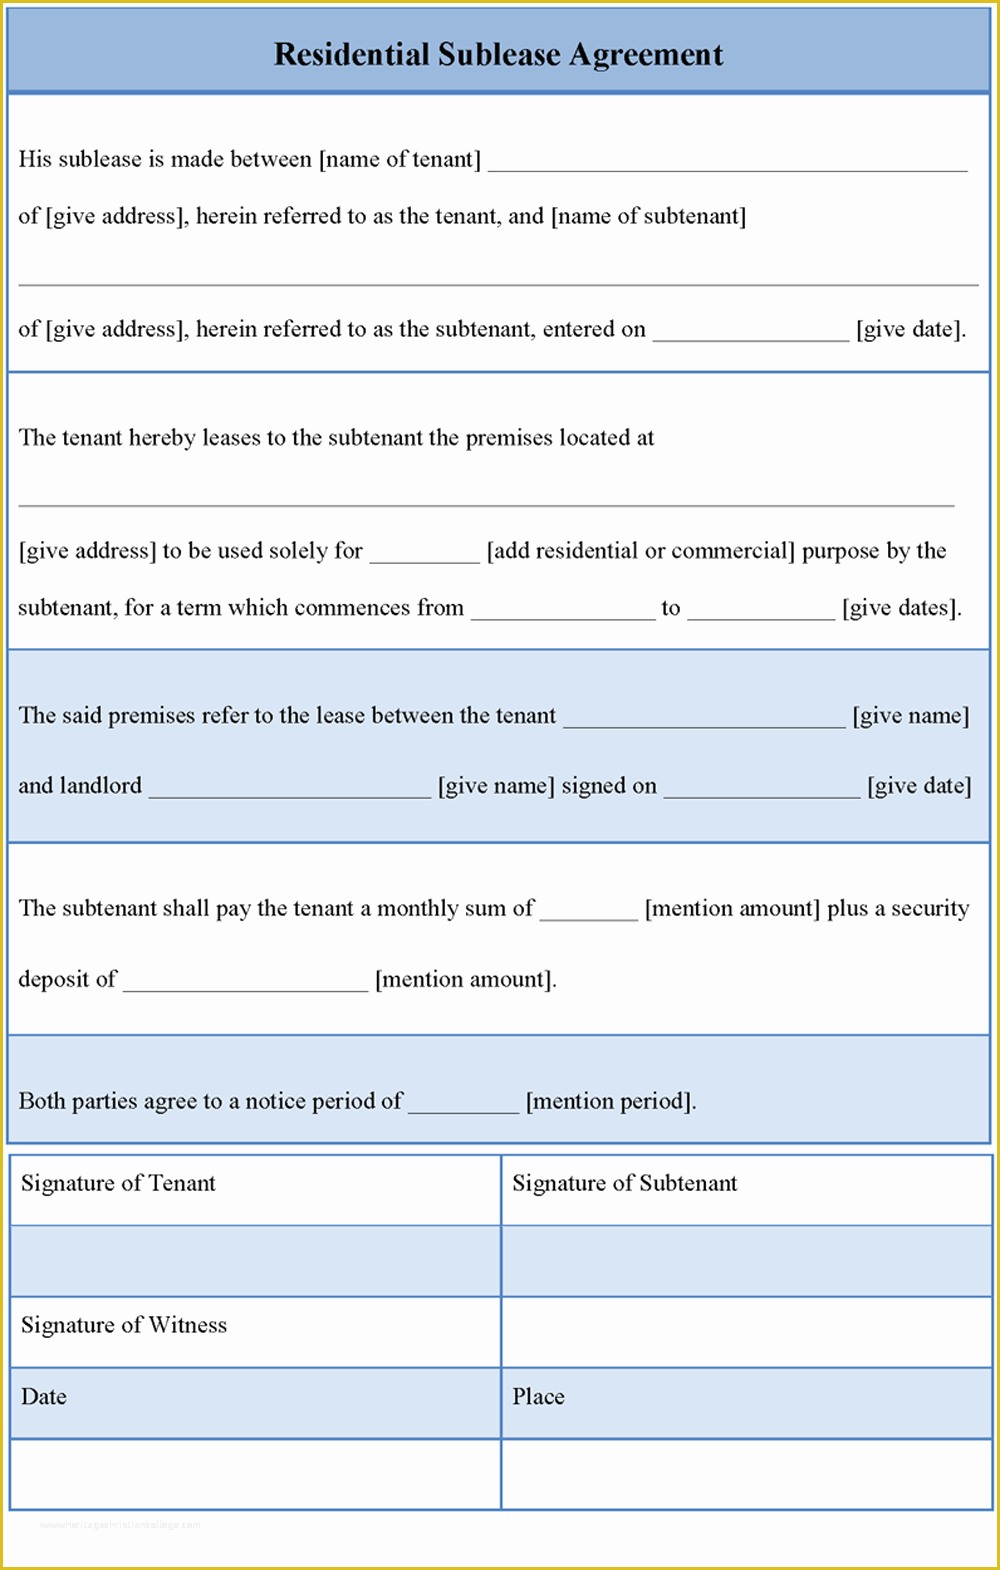 Free Sublease Agreement Template Of Agreement Template for Residential Sublease Example Of